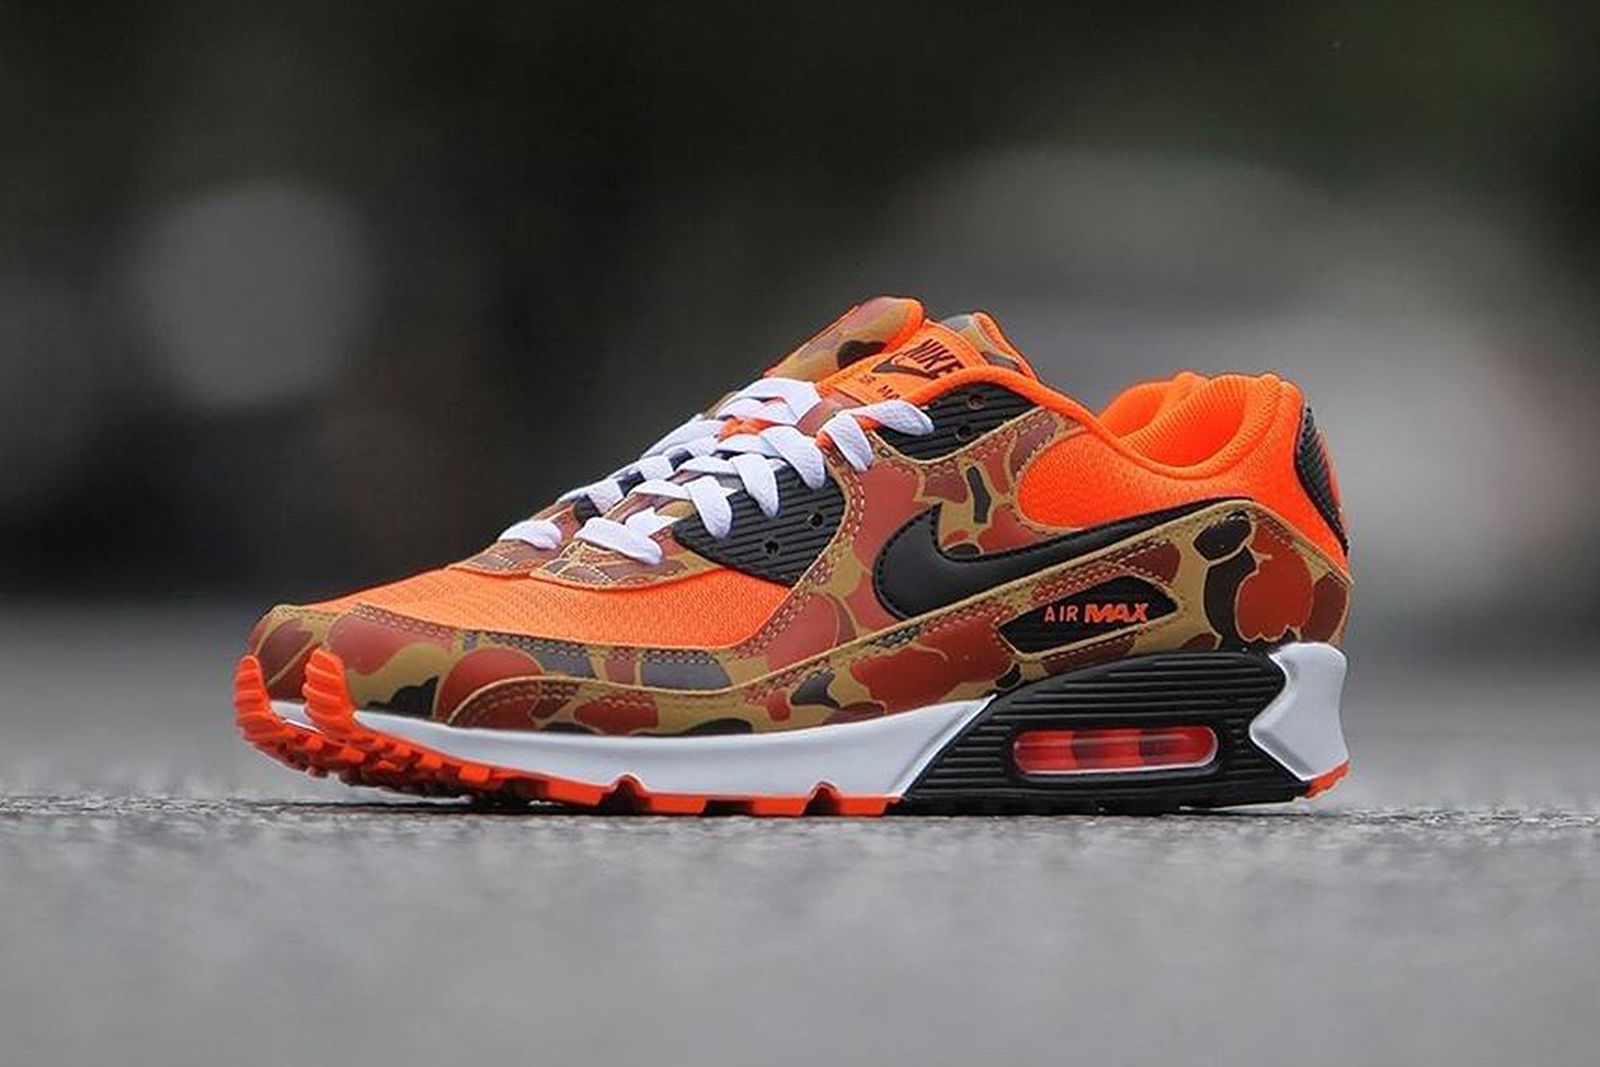 Side view of orange duck camo Nike Air Max 90